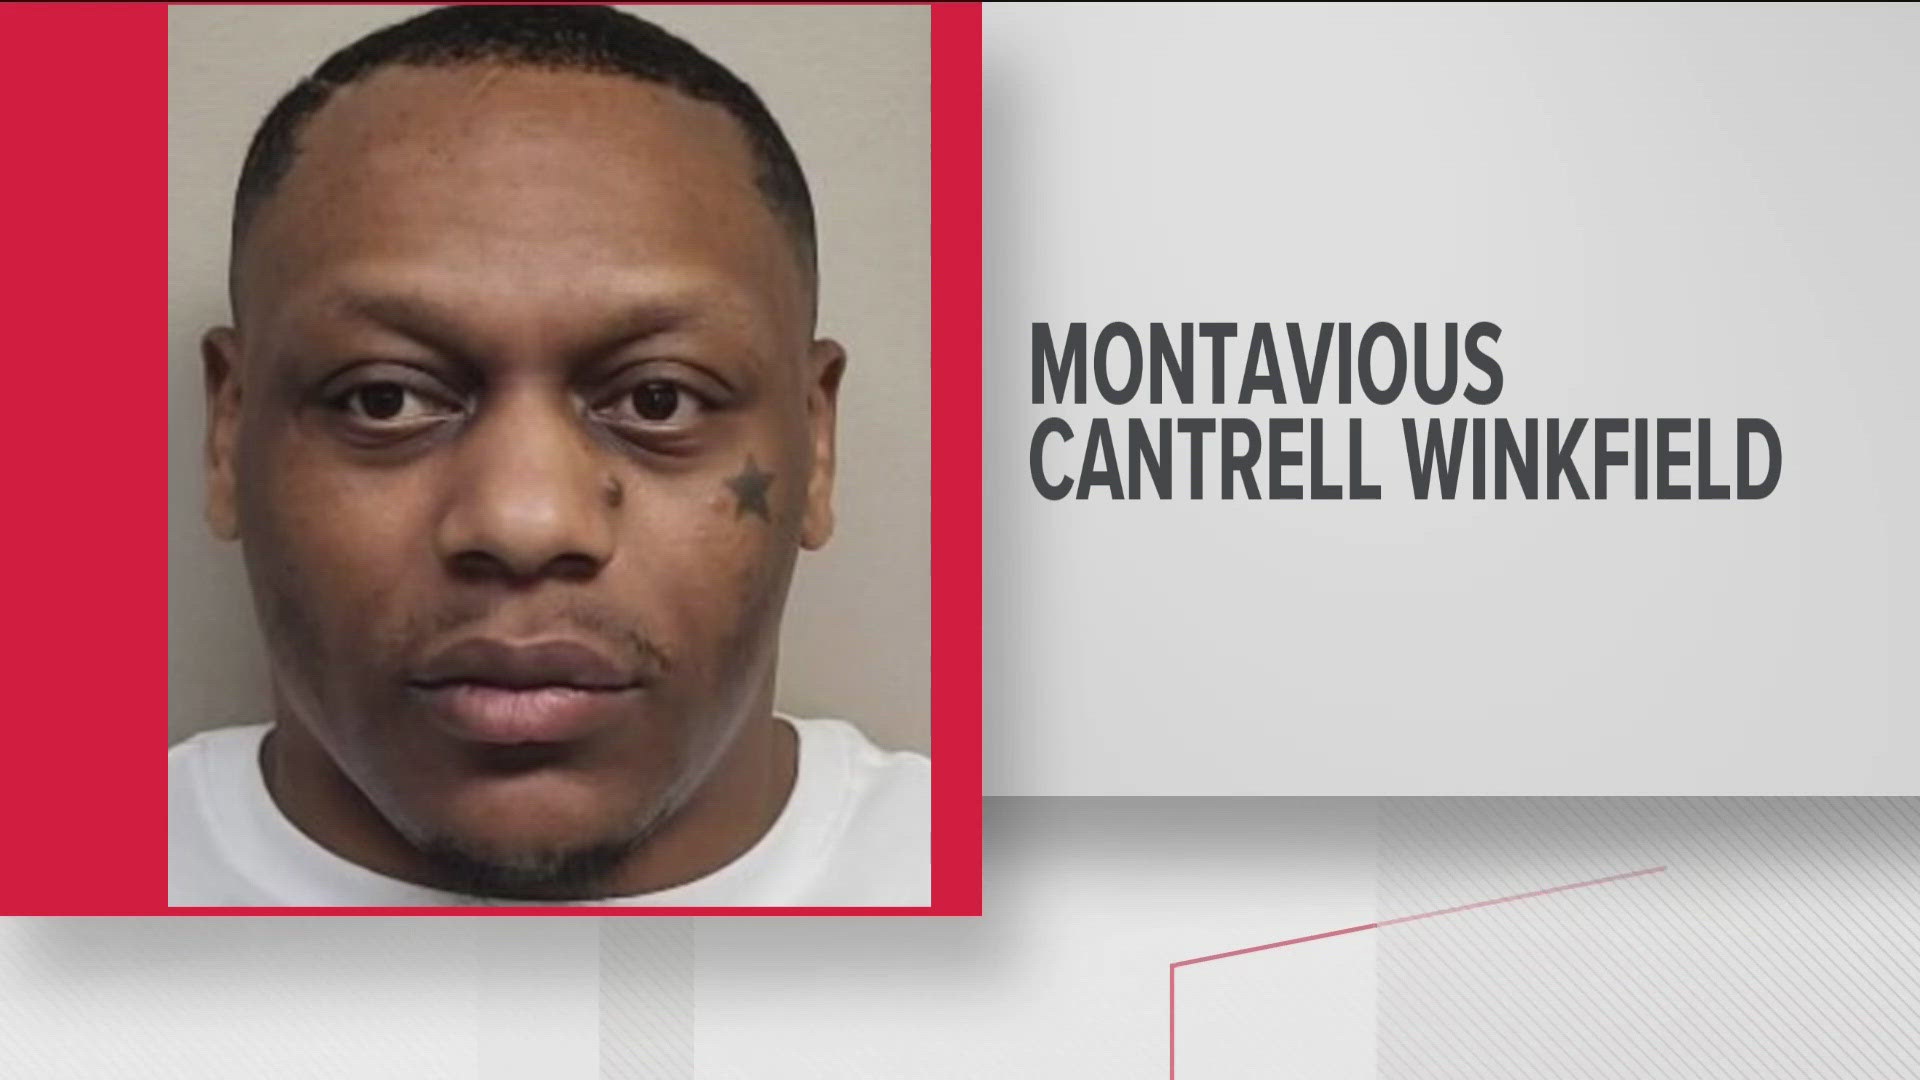 The GBI is searching for Montavious Cantrell Winkfield, who is accused of shooting at police in Toccoa.